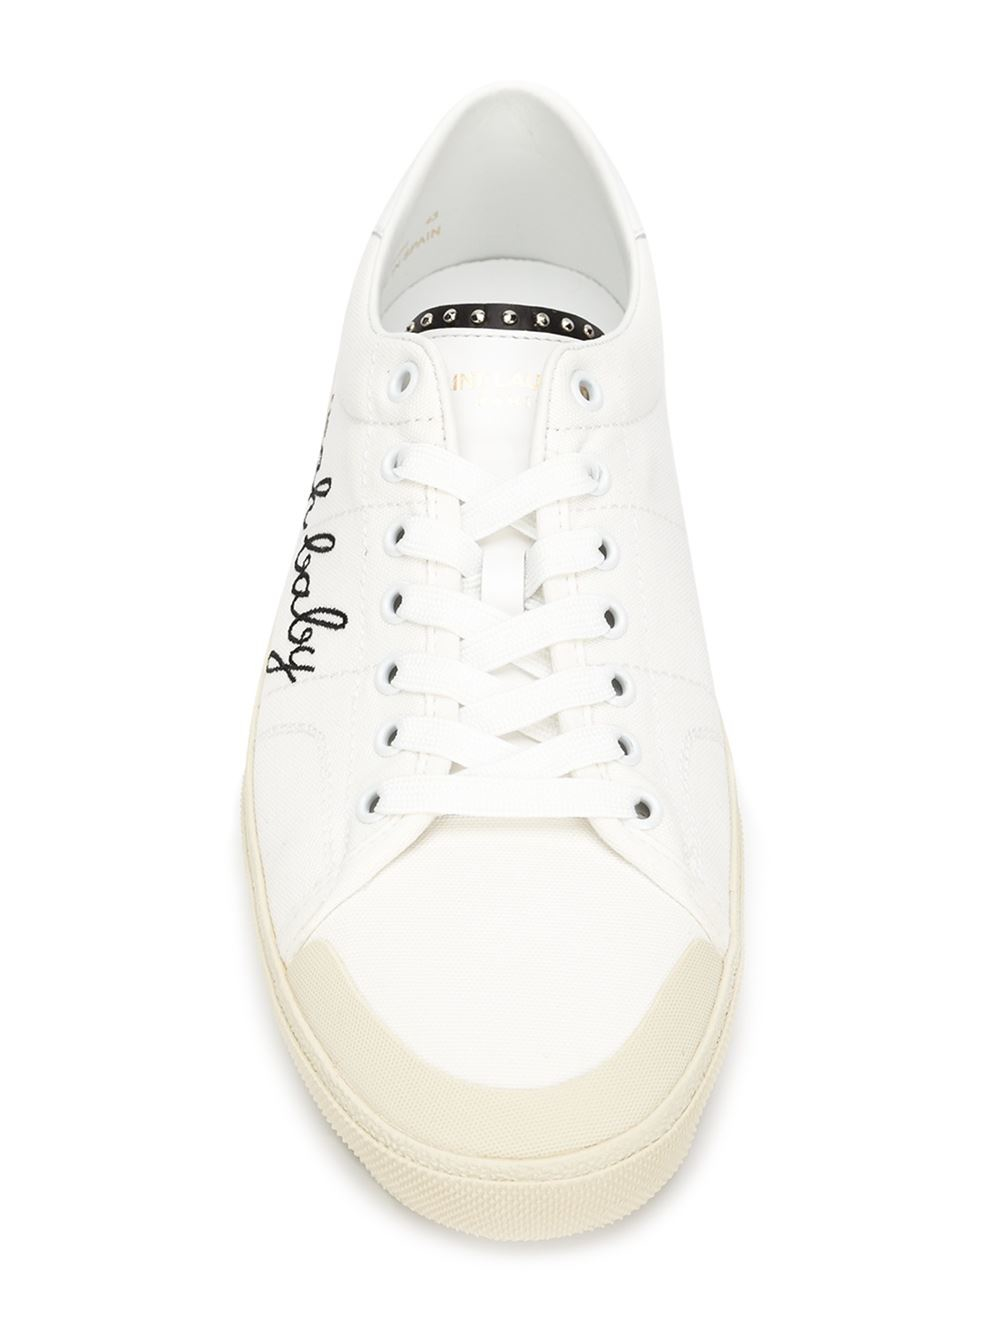 Saint Laurent Leather Yeah Baby Sneakers in White for Men - Lyst